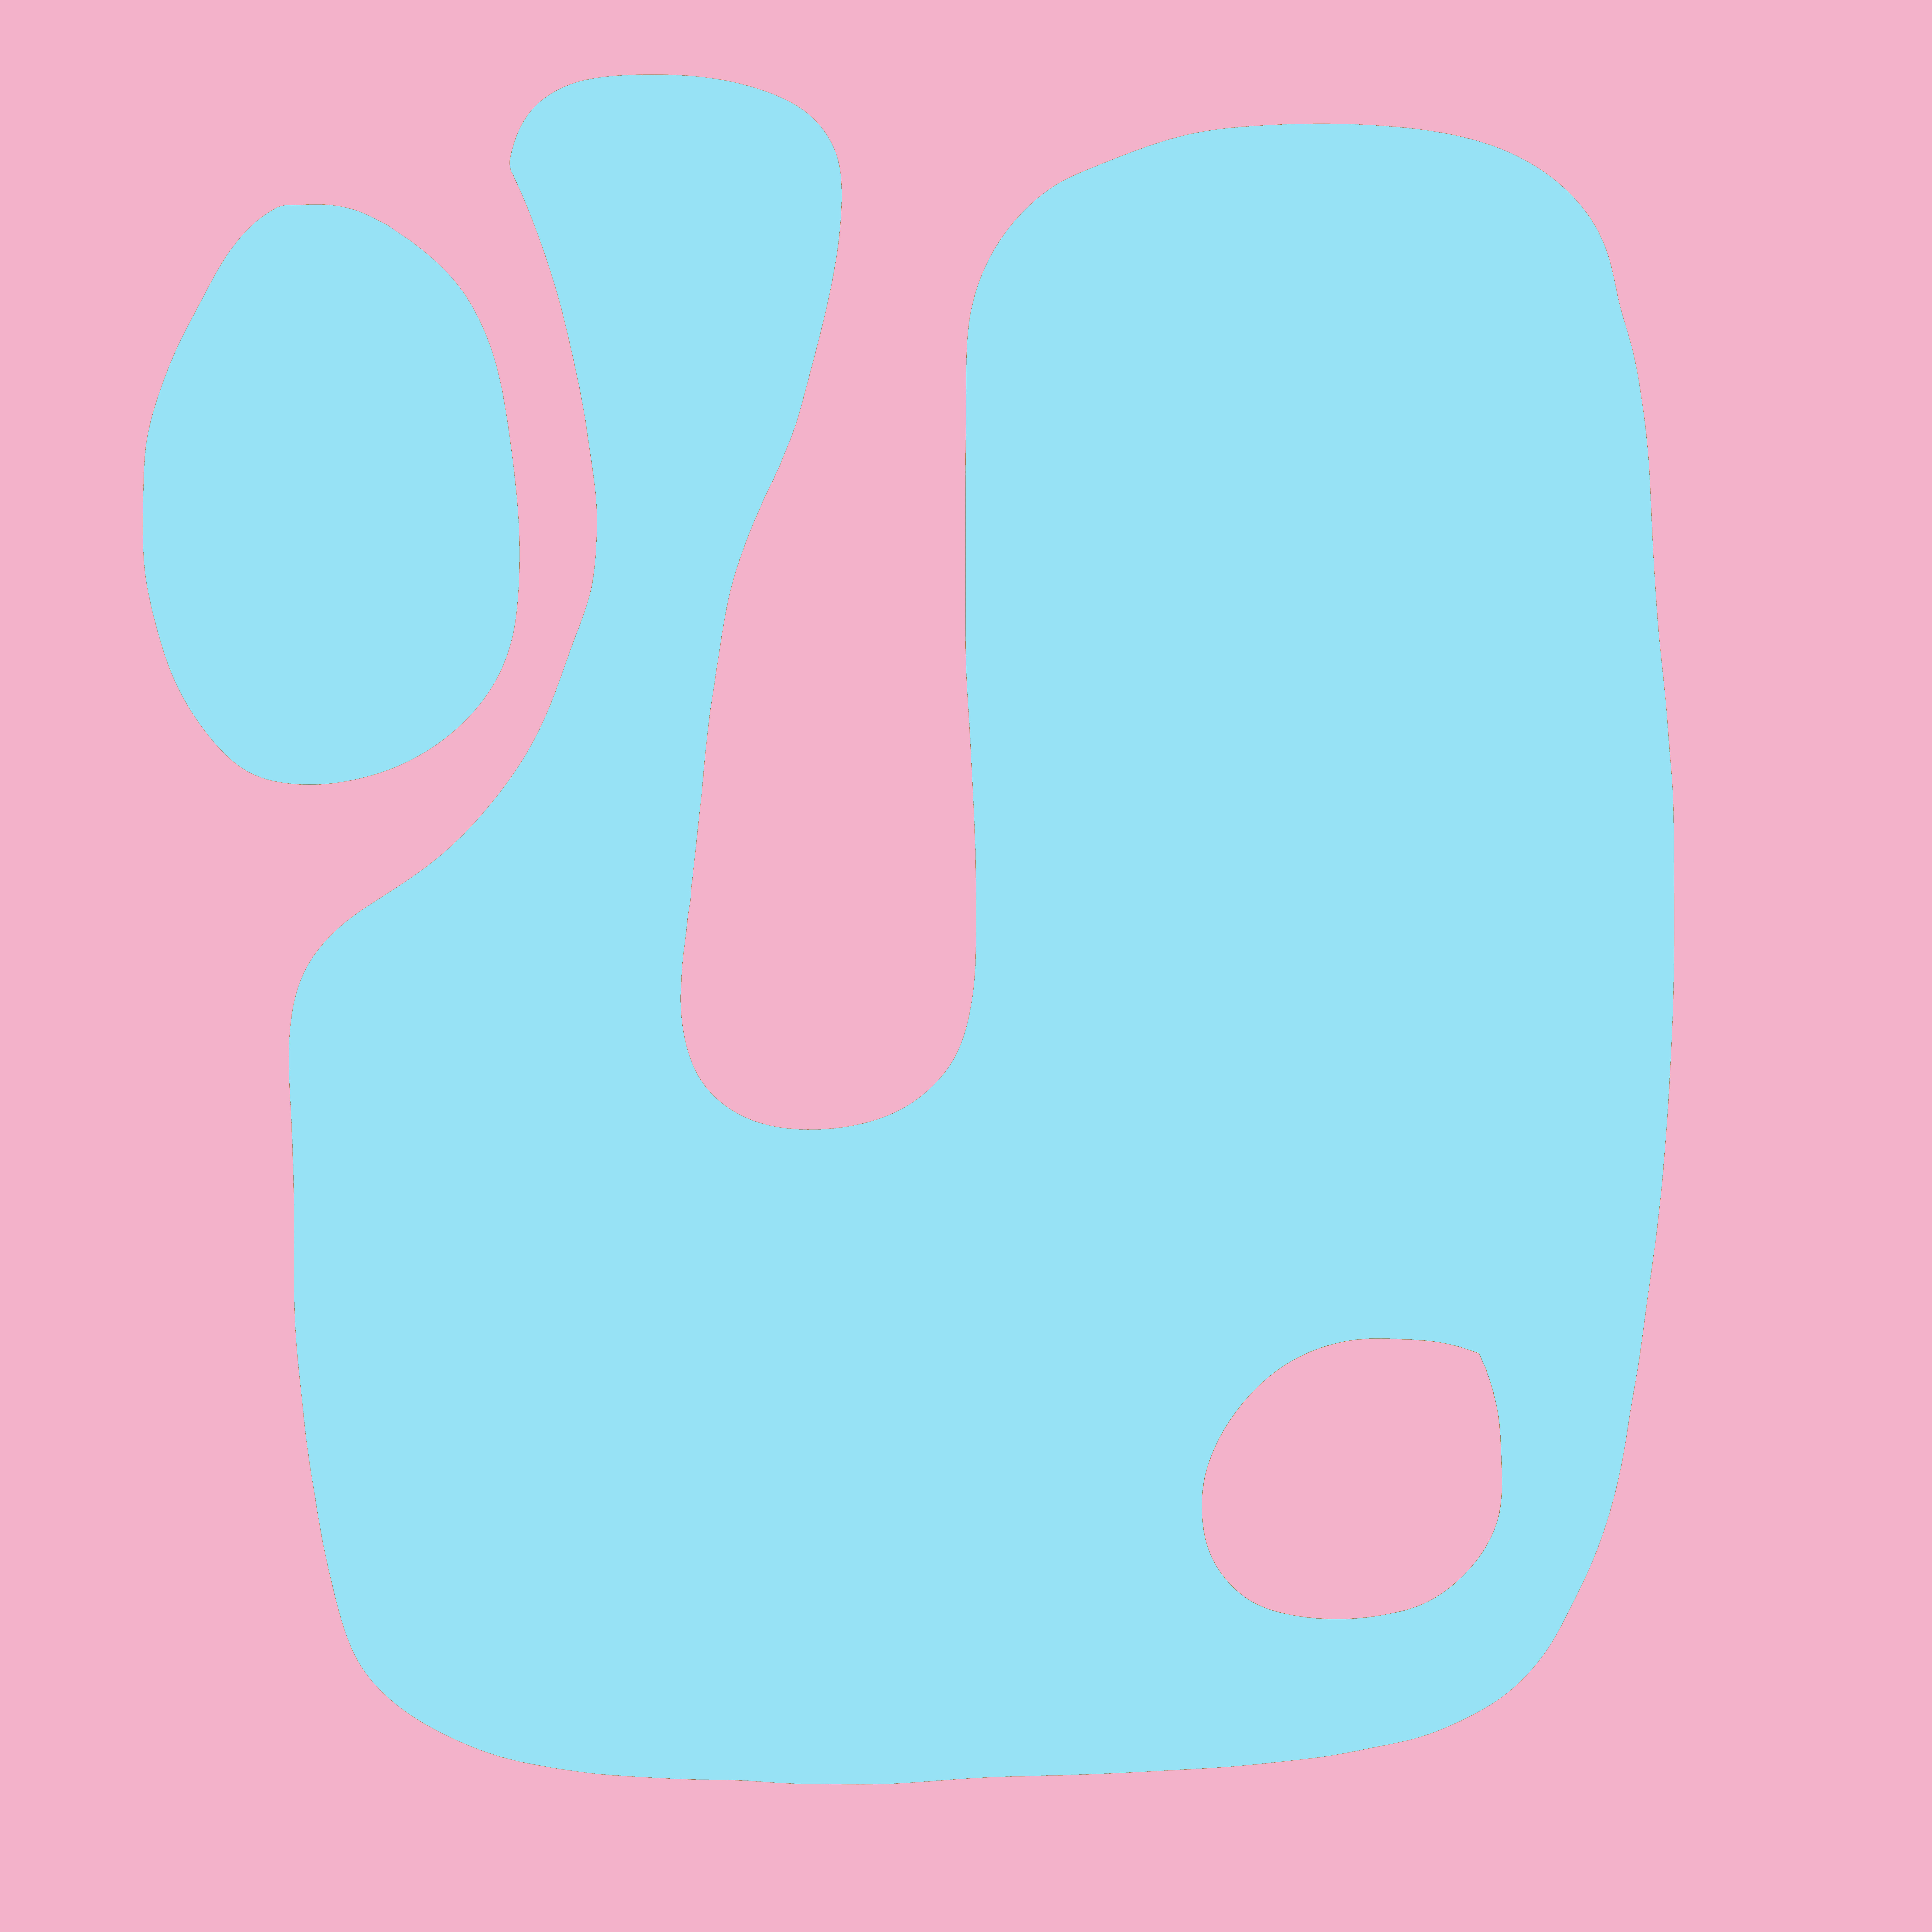 art every day number 263 / illustration / pink blue / abstract.mod